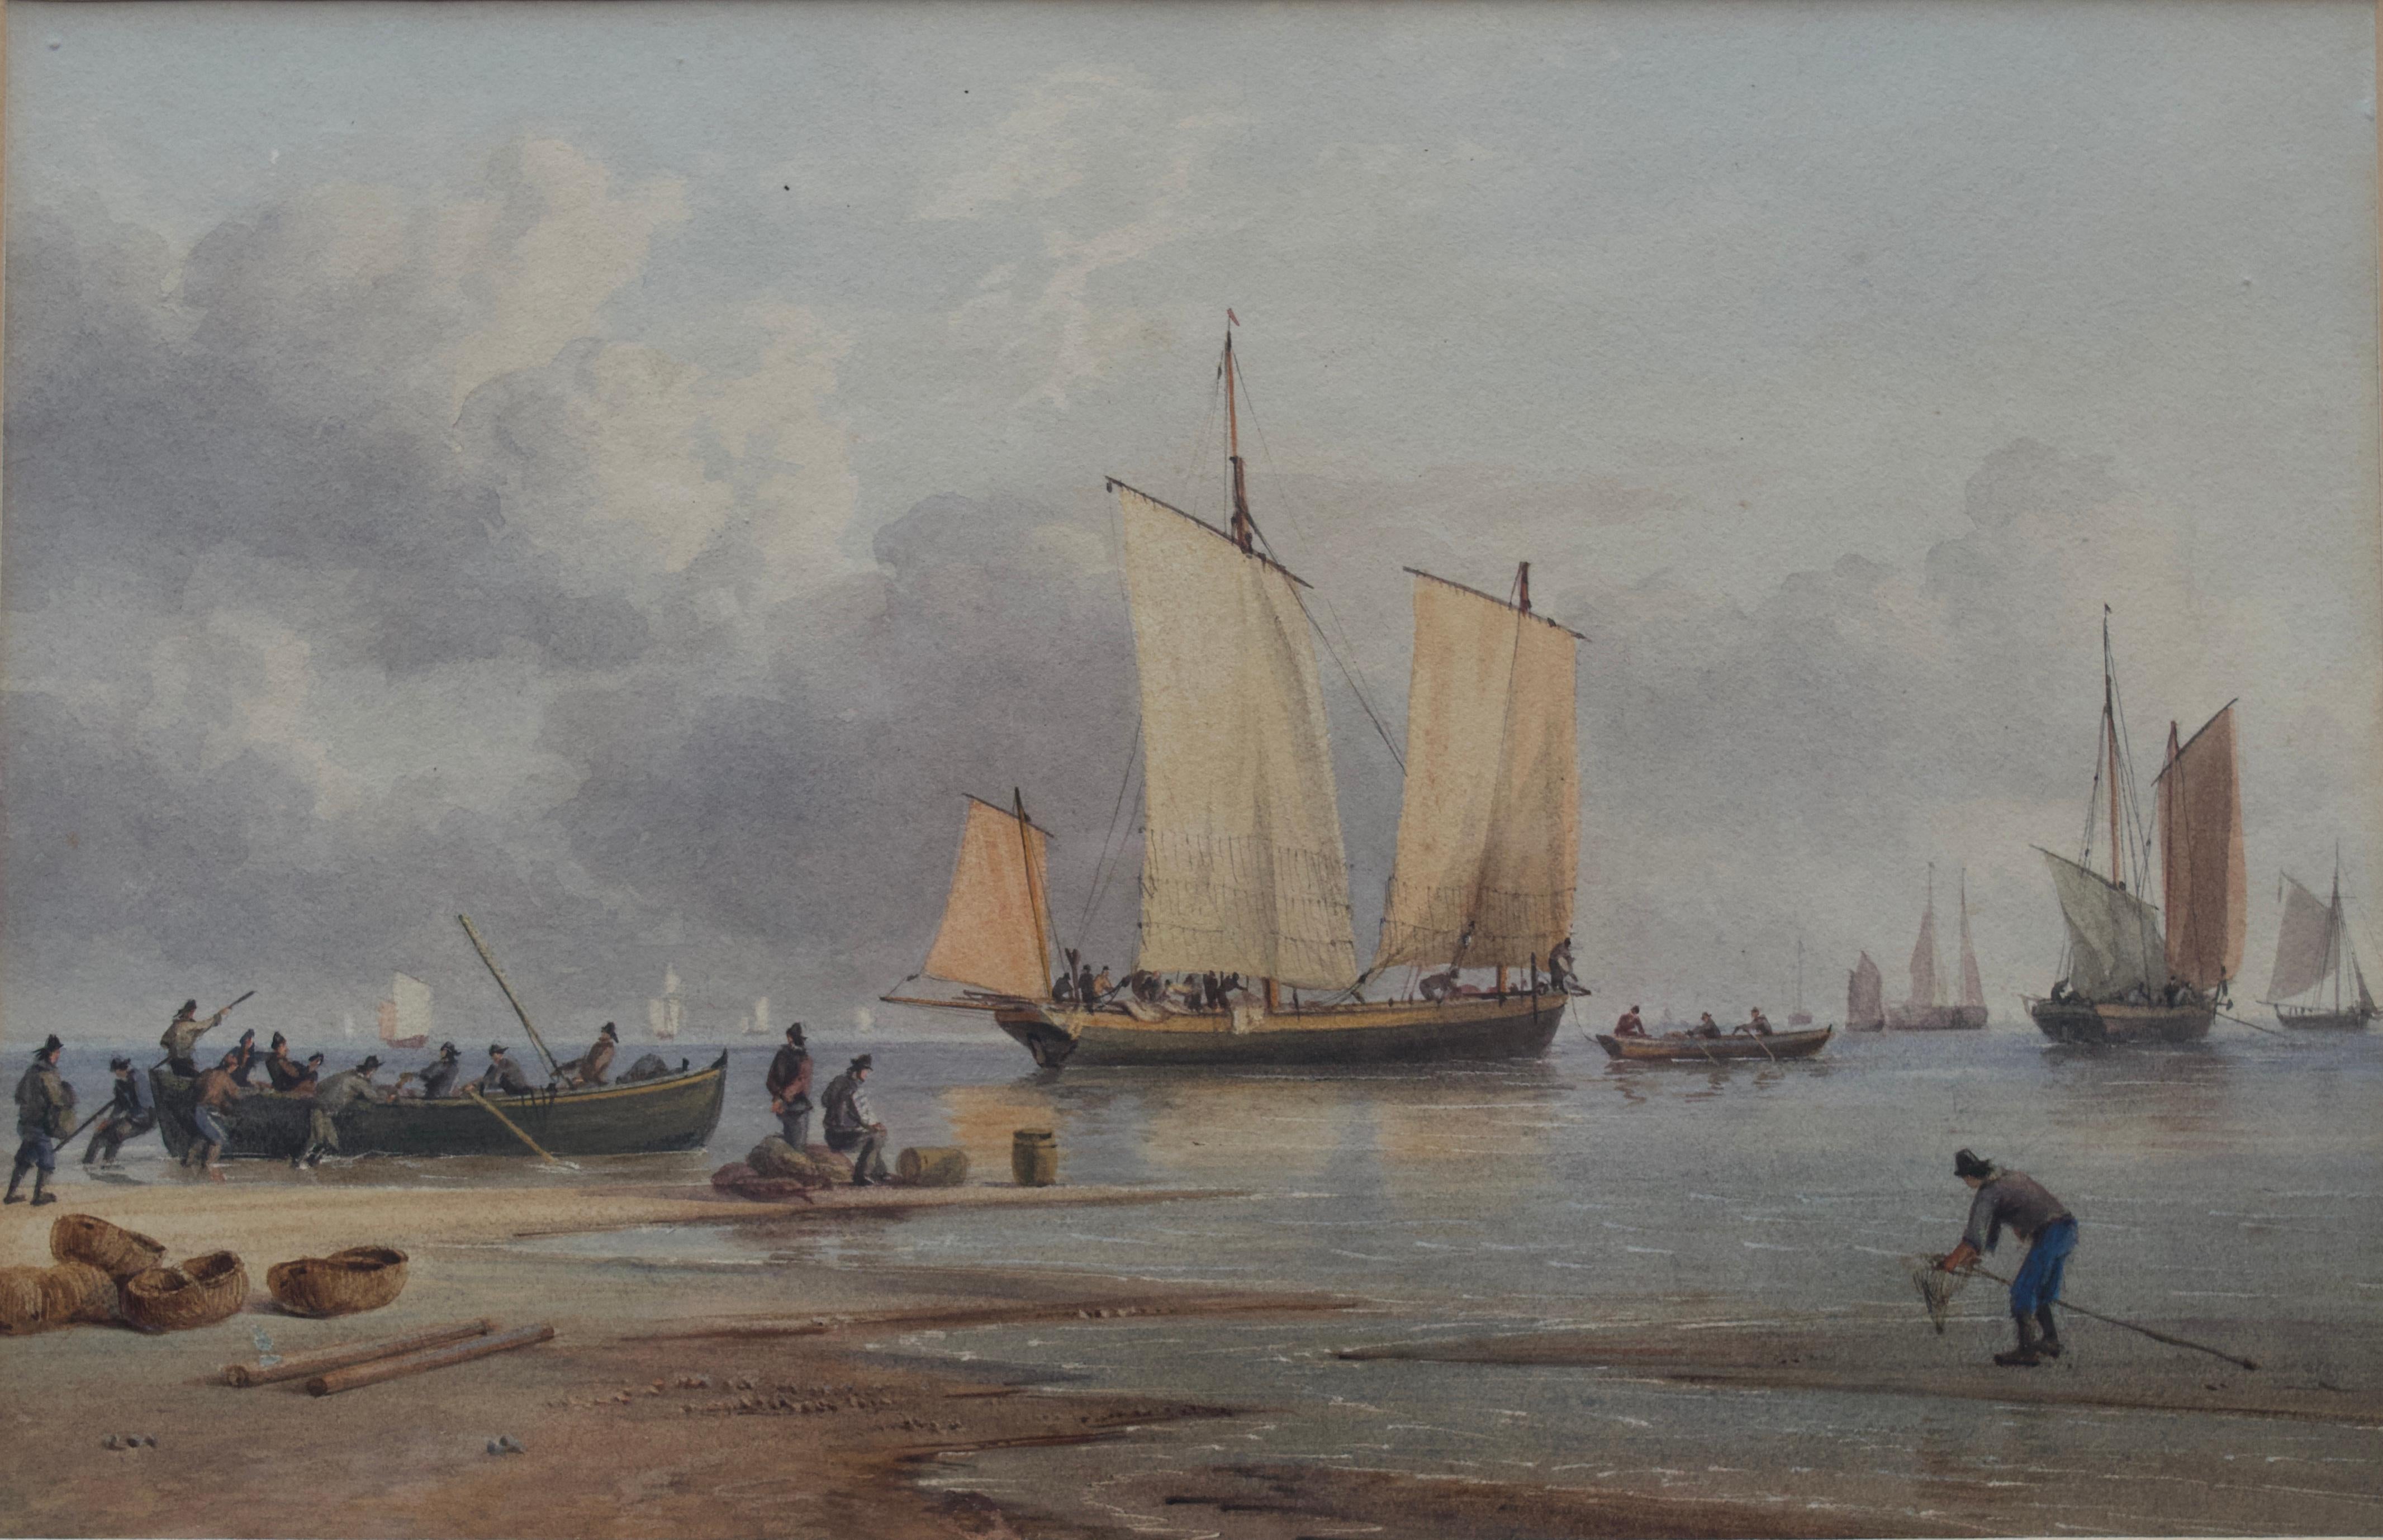 A wonderful example of the rare and intricate work of John Cantiloe Joy (1806-1866)

Shipping off the Norfolk coast with figures on the shore
Watercolour over traces of pencil
6½ x 10 inches
13½ x 17 inches with frame

John Cantiloe Joy was the